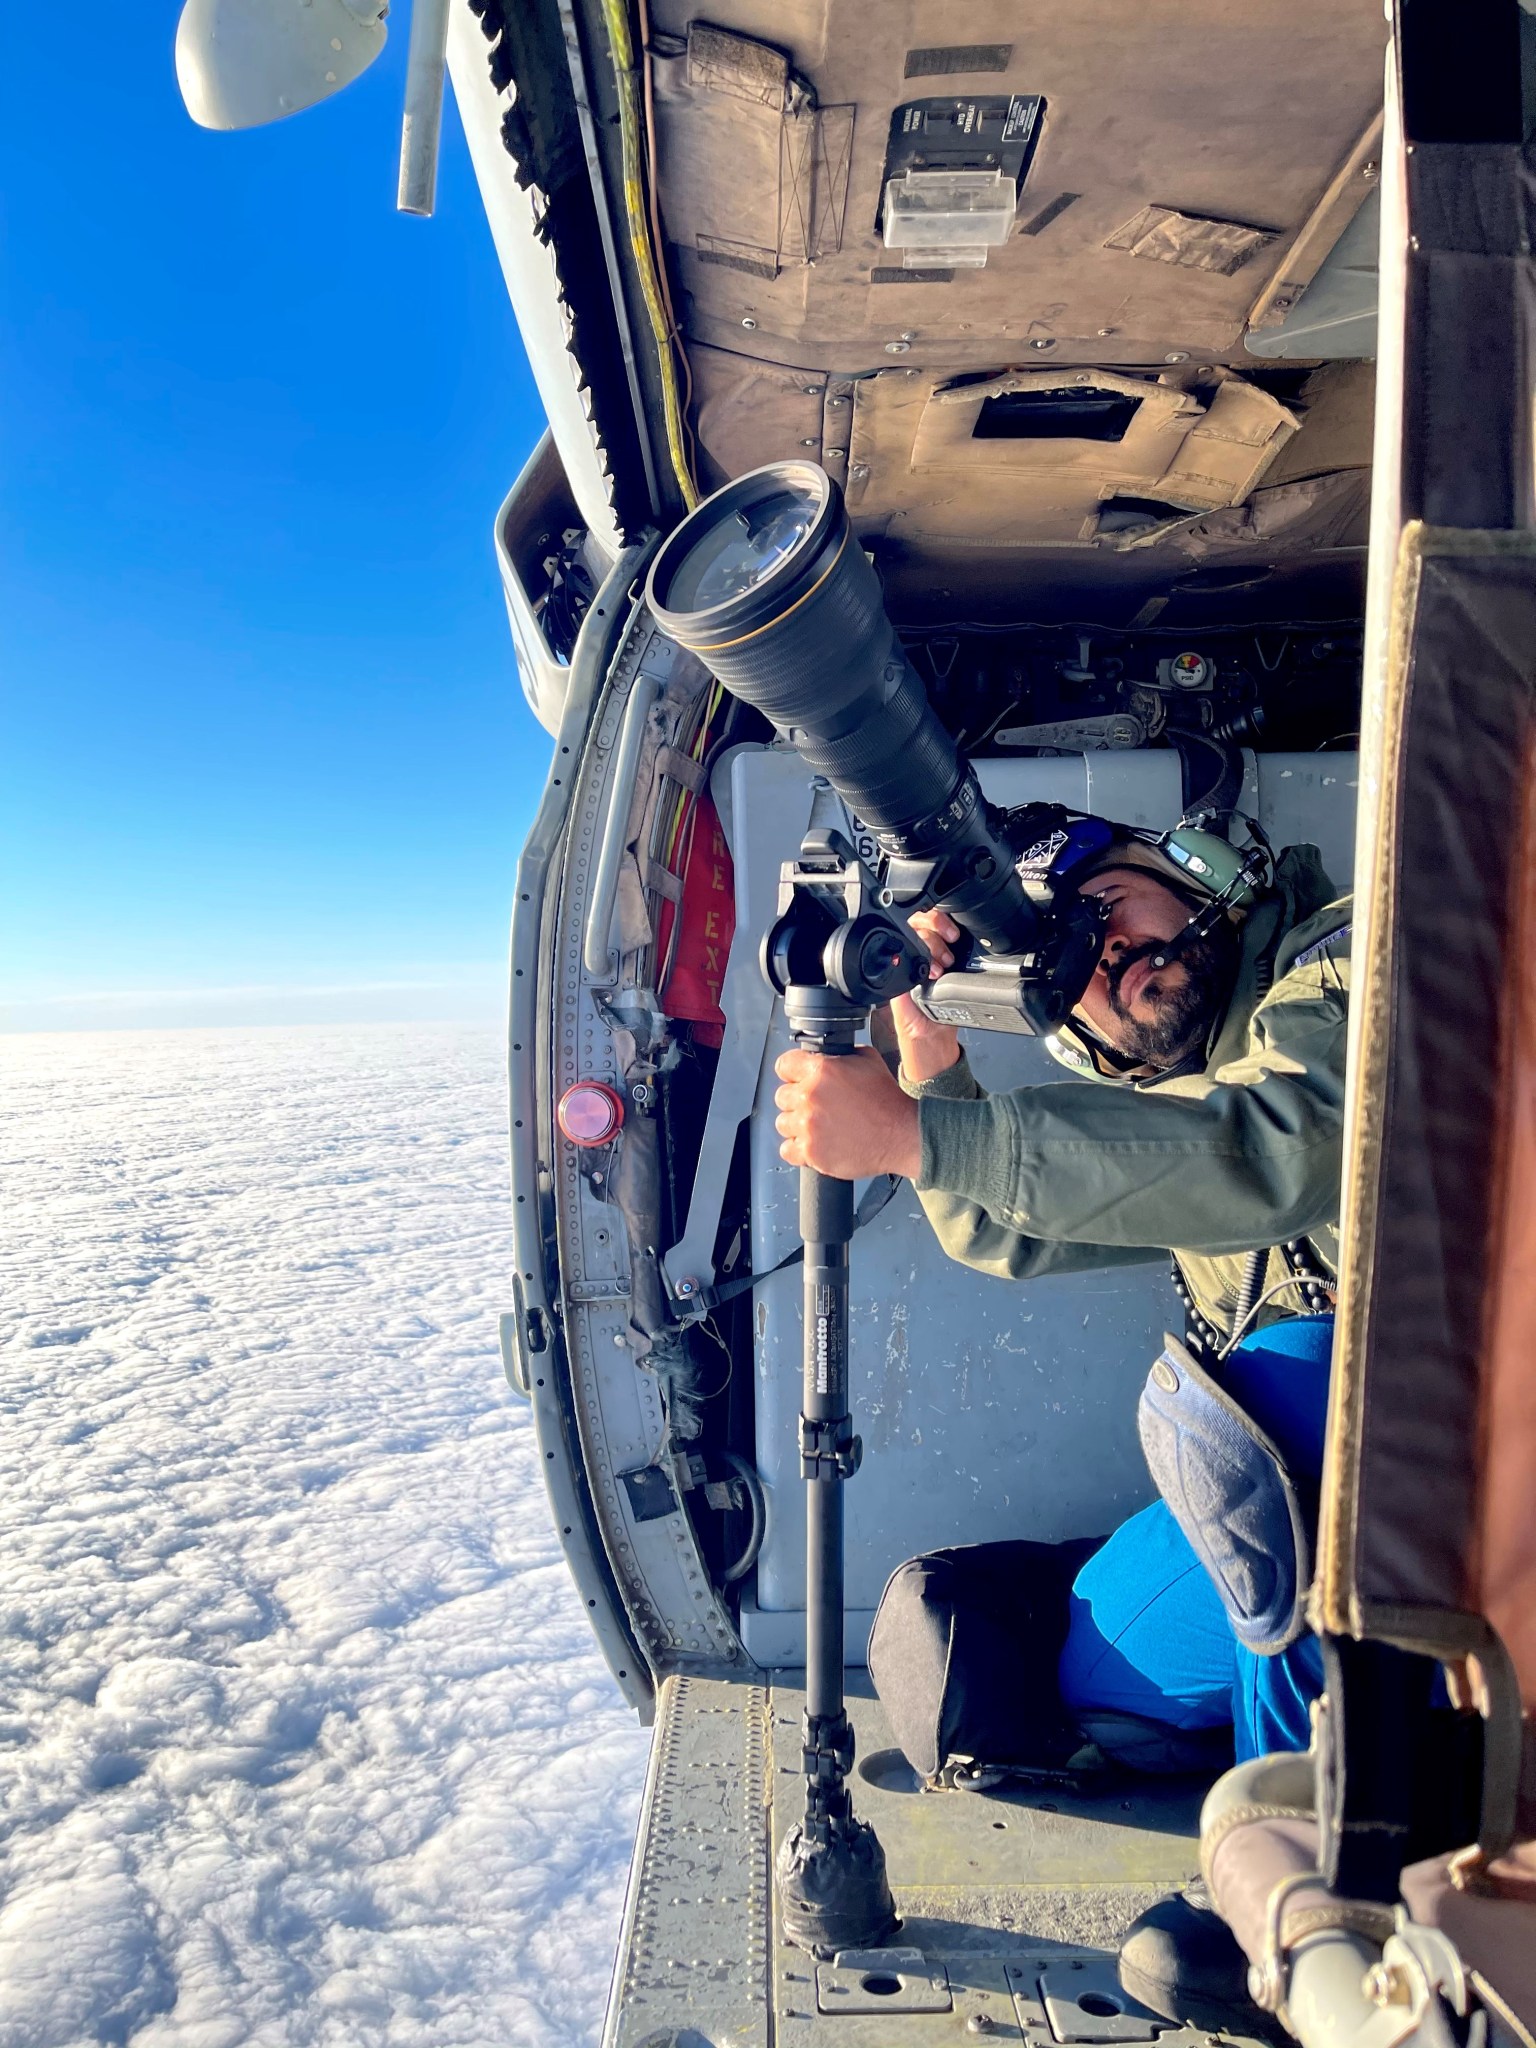 NASA Scientific Photographer Josh Valcarcel taking photos from a helicopter cabin